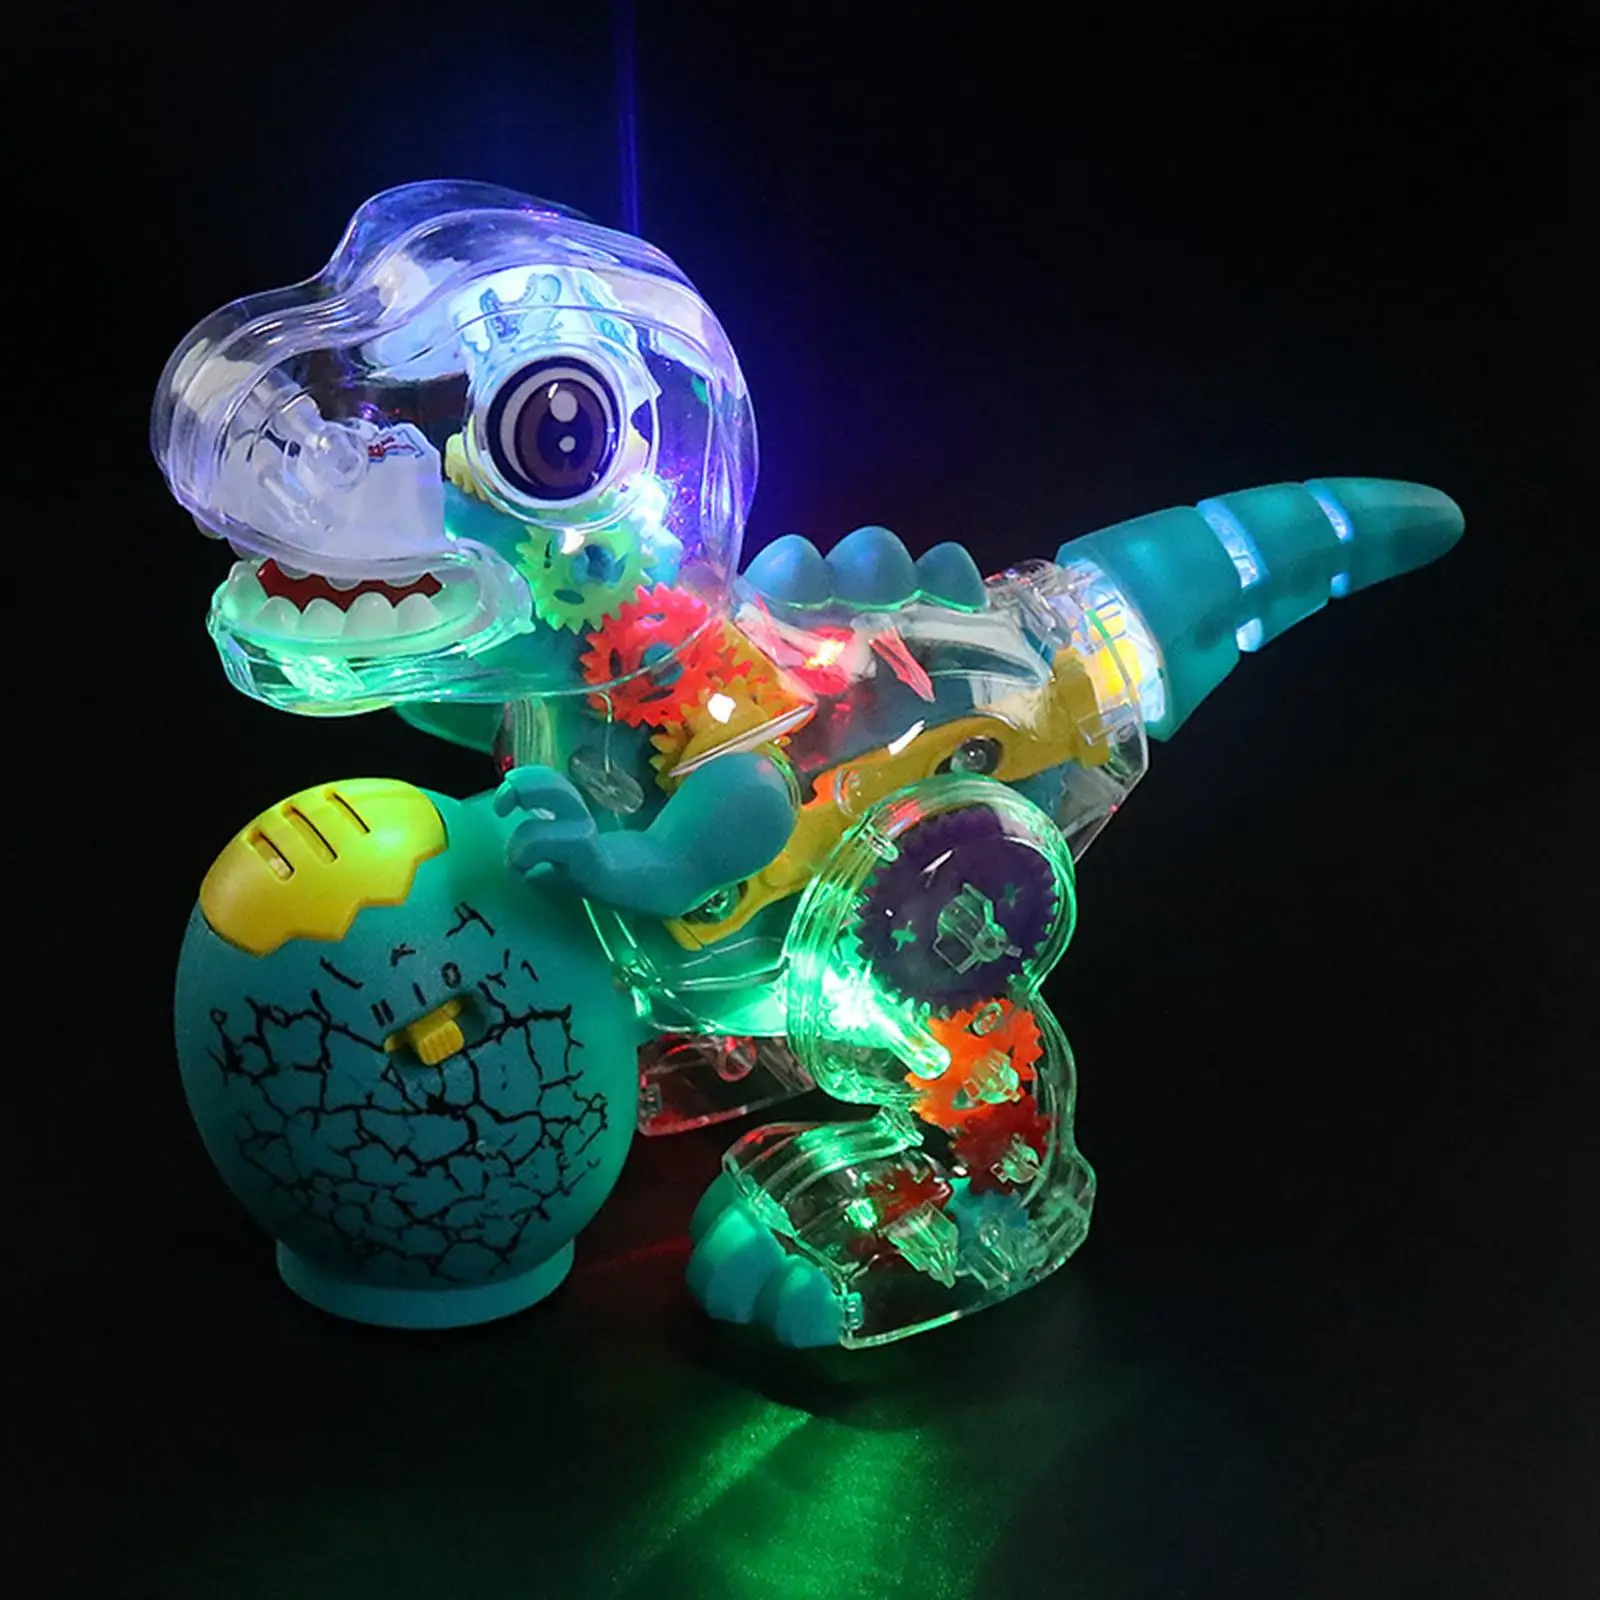 Transparent Electric Dinosaur Toy Obstacle Avoidance Toddlers LED Lights Building Swing Arm Tail Halloween Kids Preschool Toy